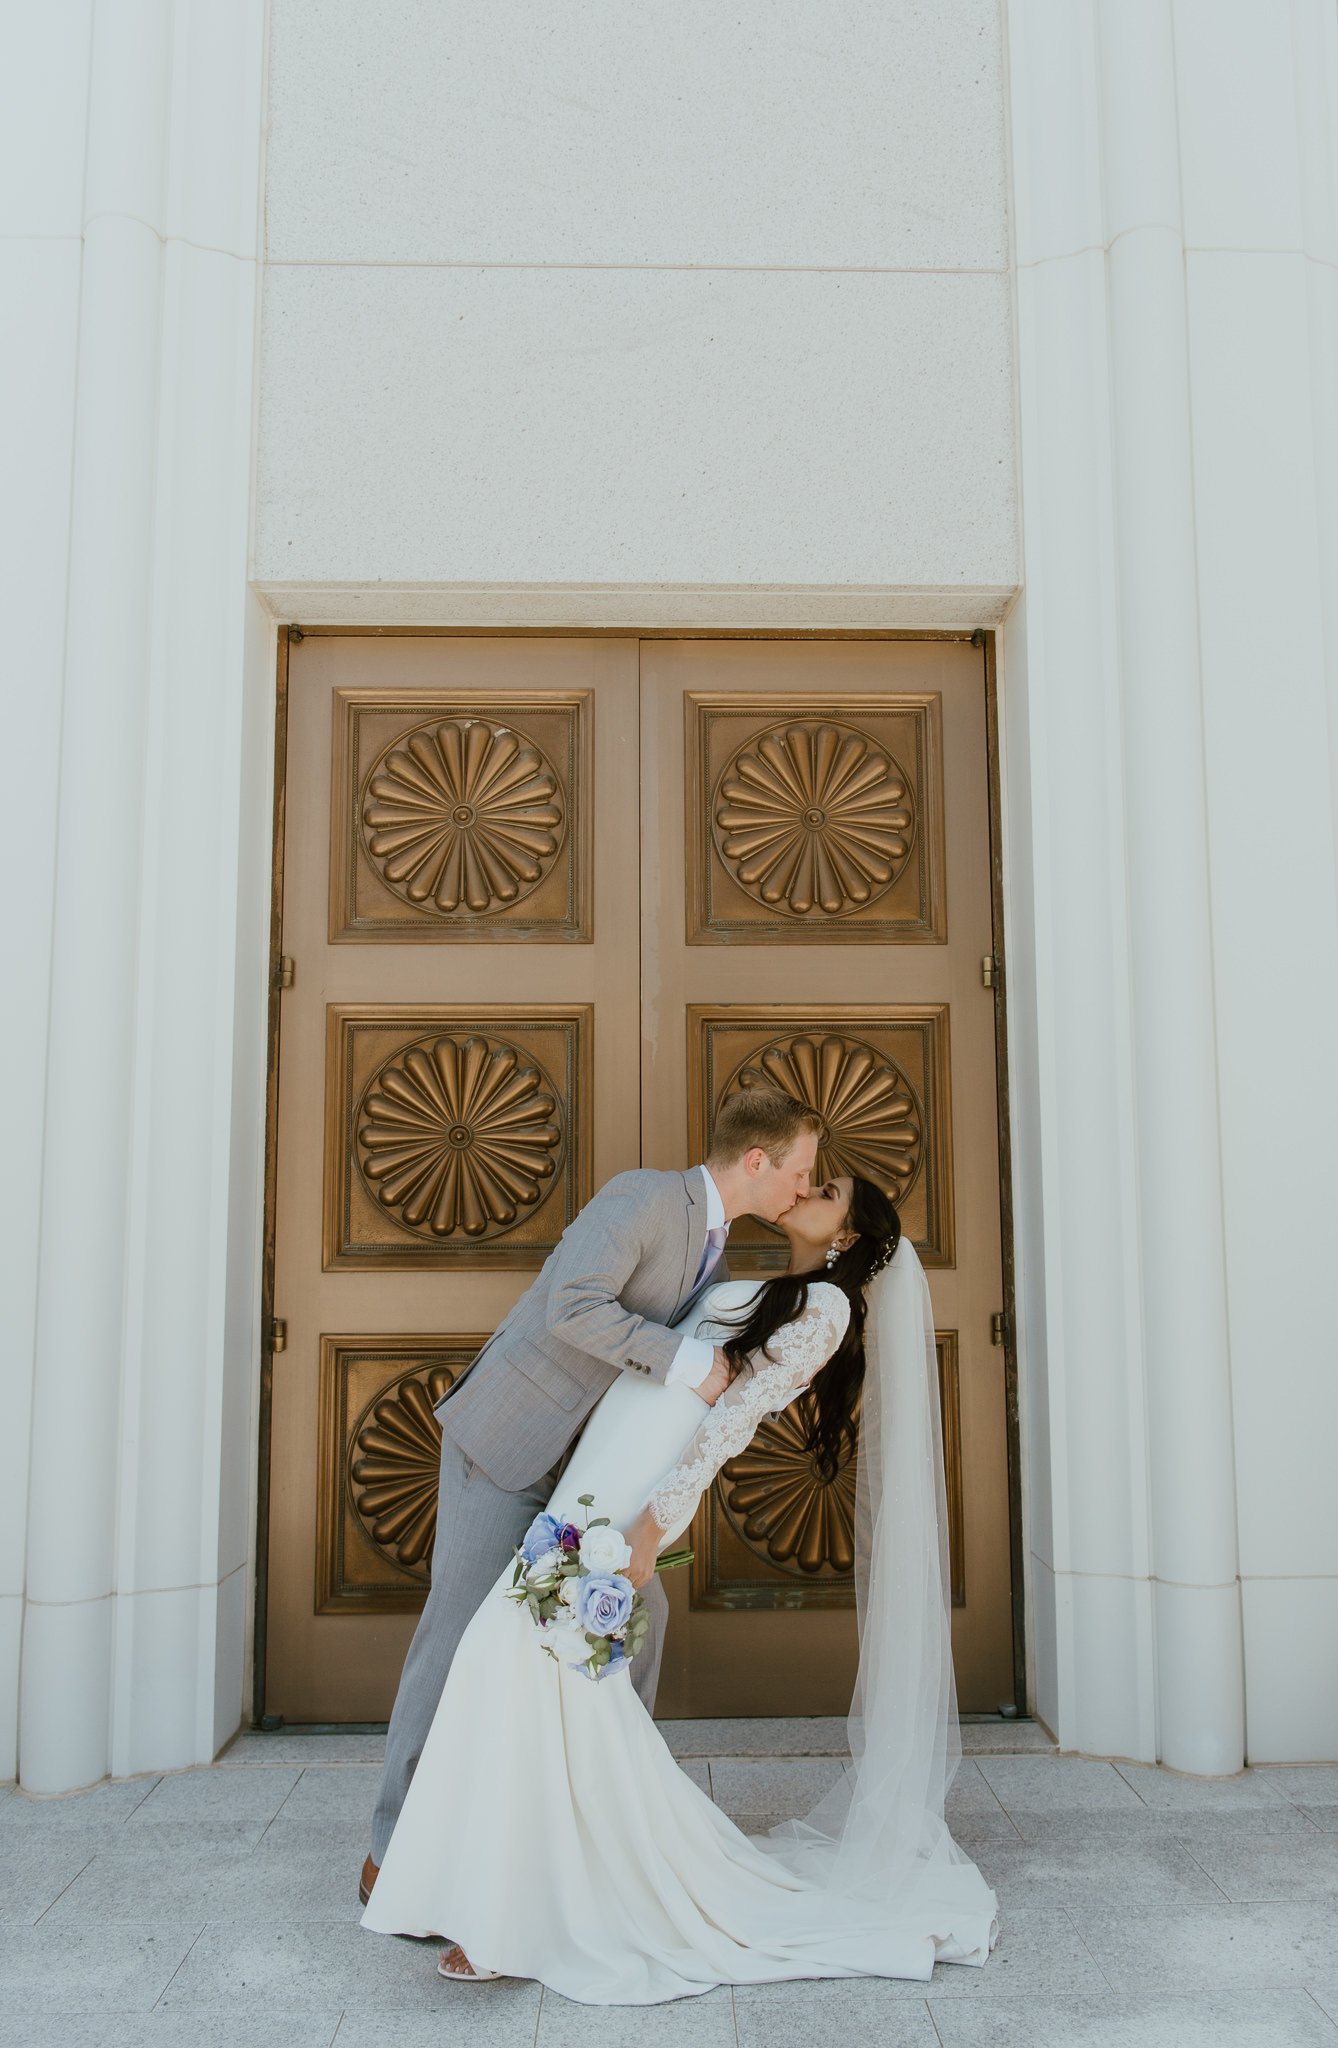 Utah-State-Capitol-Spring-Blossons-Bountiful-LDS-Wedding-Hopesandcheers-photo-49